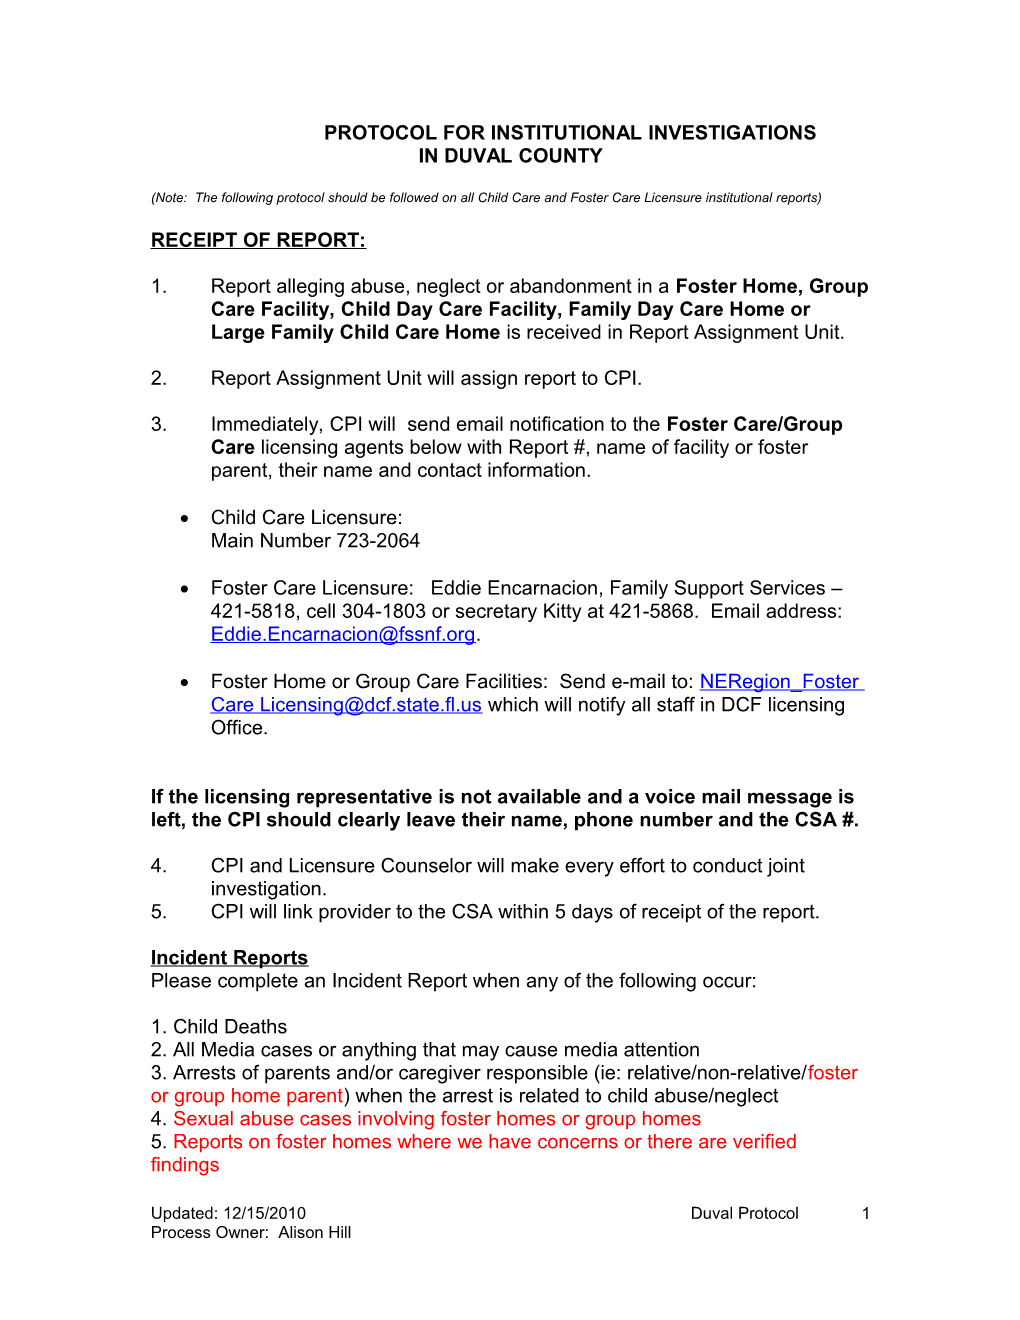 Draft Protocol for Institutional Reports Updated Dec 2010